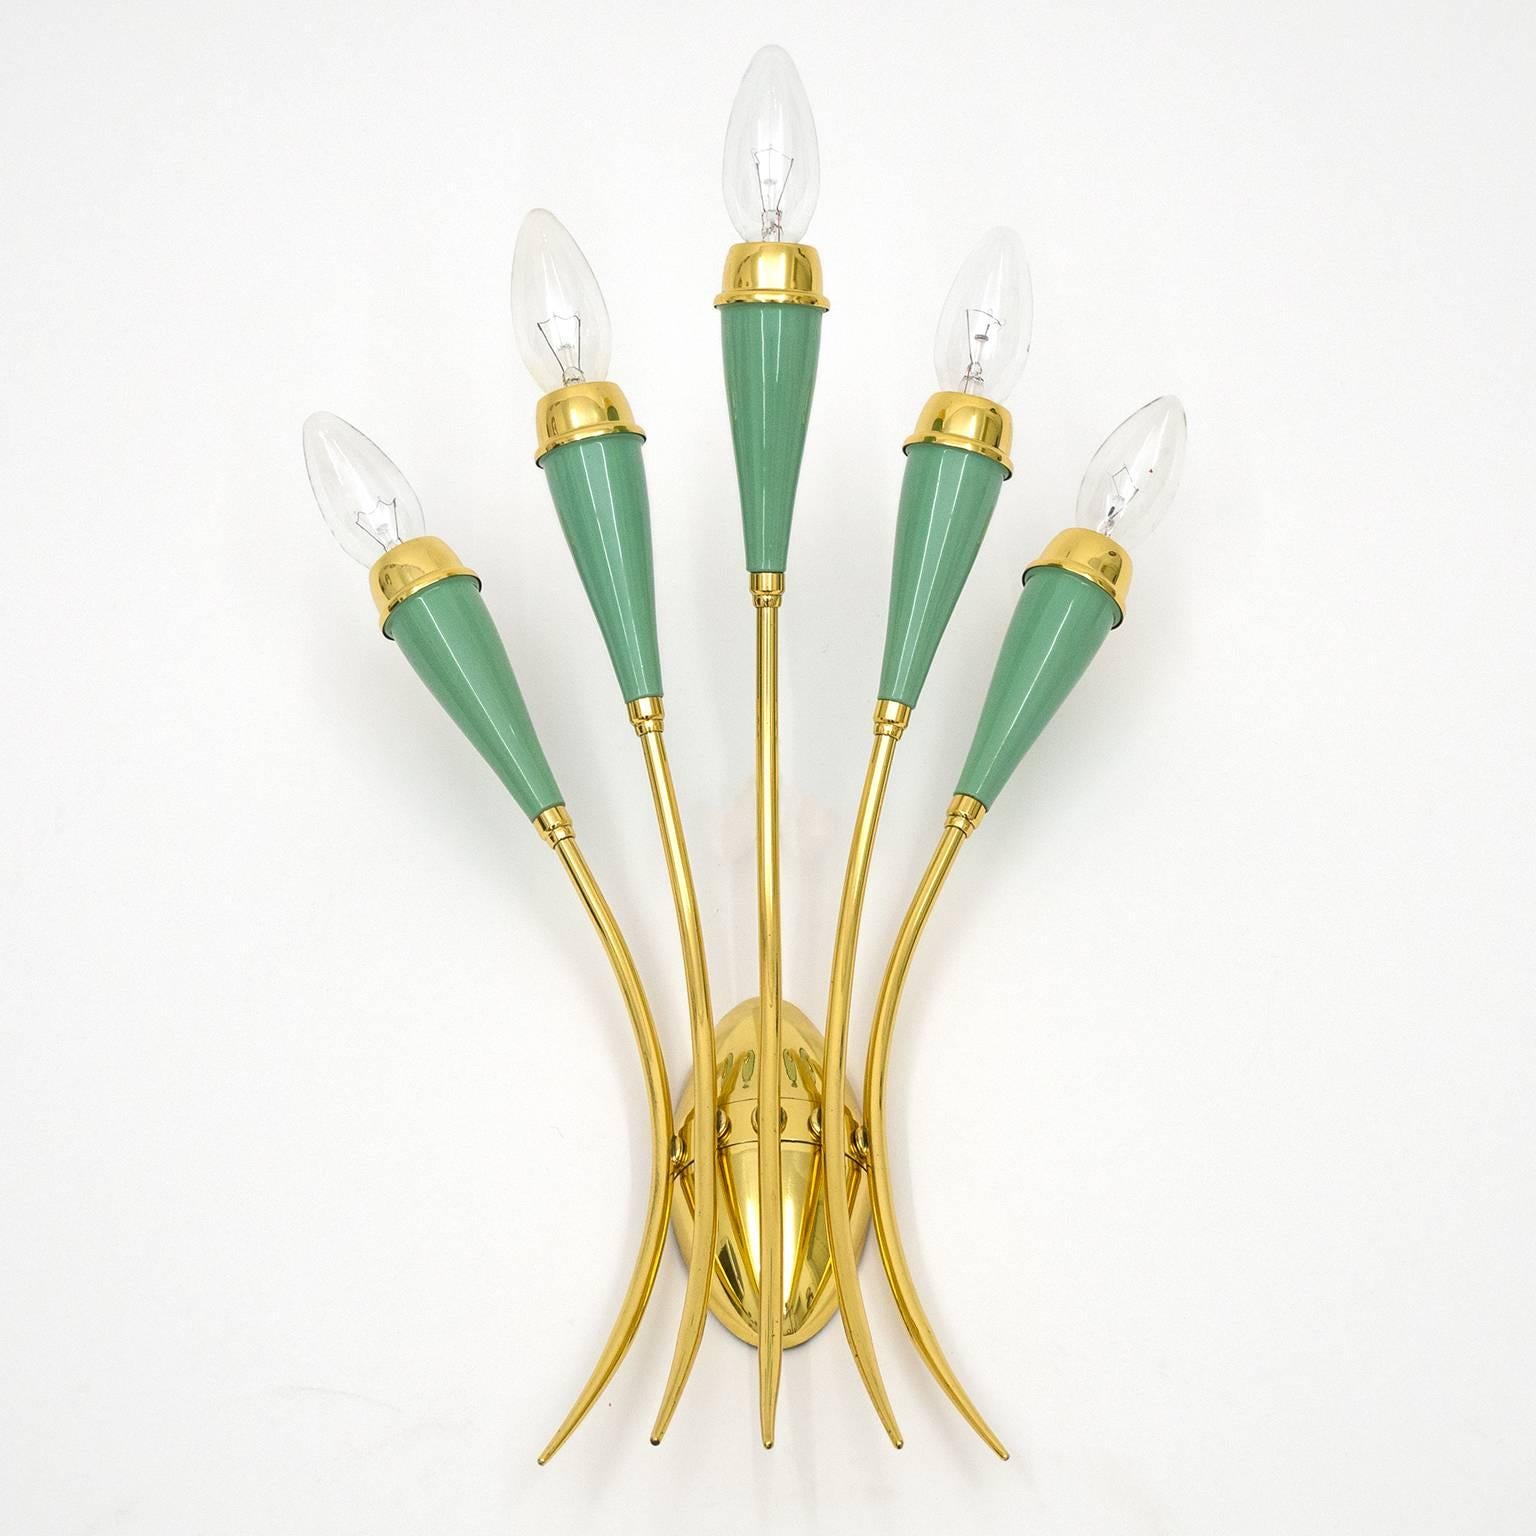 Elegant Italian Mid-Century wall light in brass and lacquered aluminium. The original paint is of a pastel-mint hue and is in excellent condition. Five brass arms each with an original brass E14 socket with new wiring.